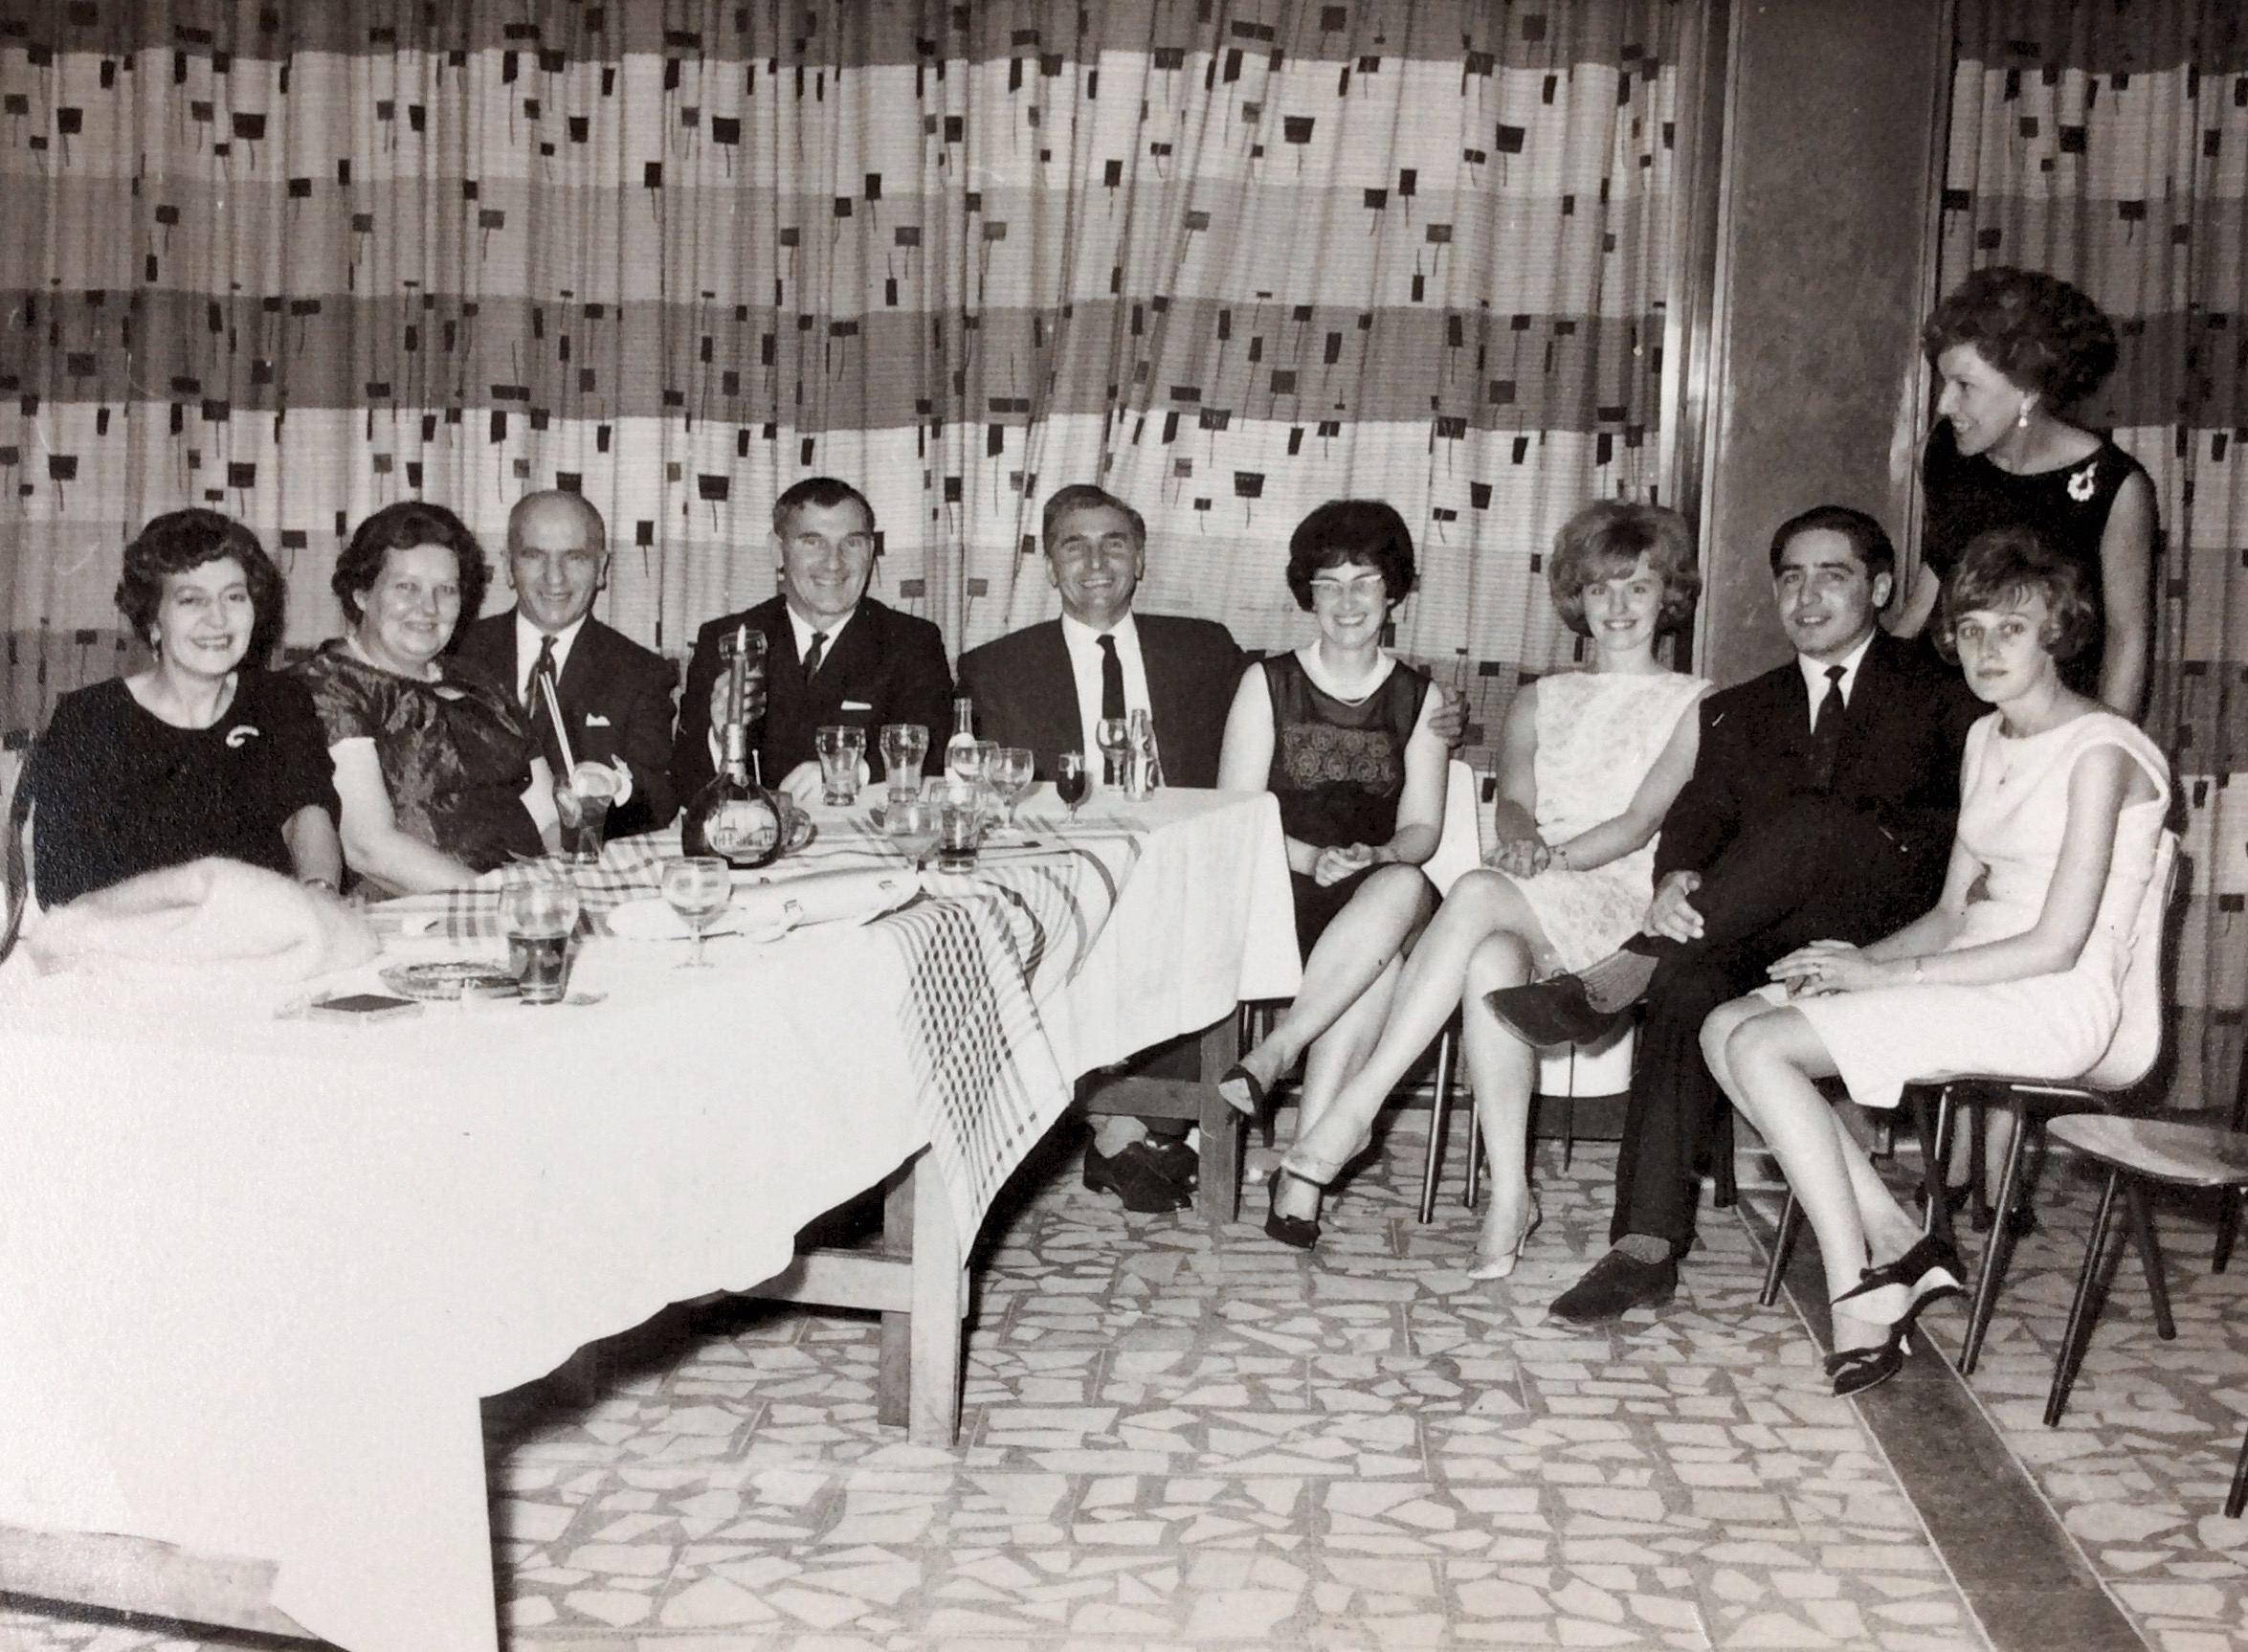 Probably a Toolmaster’s dinner dance mid 1960s